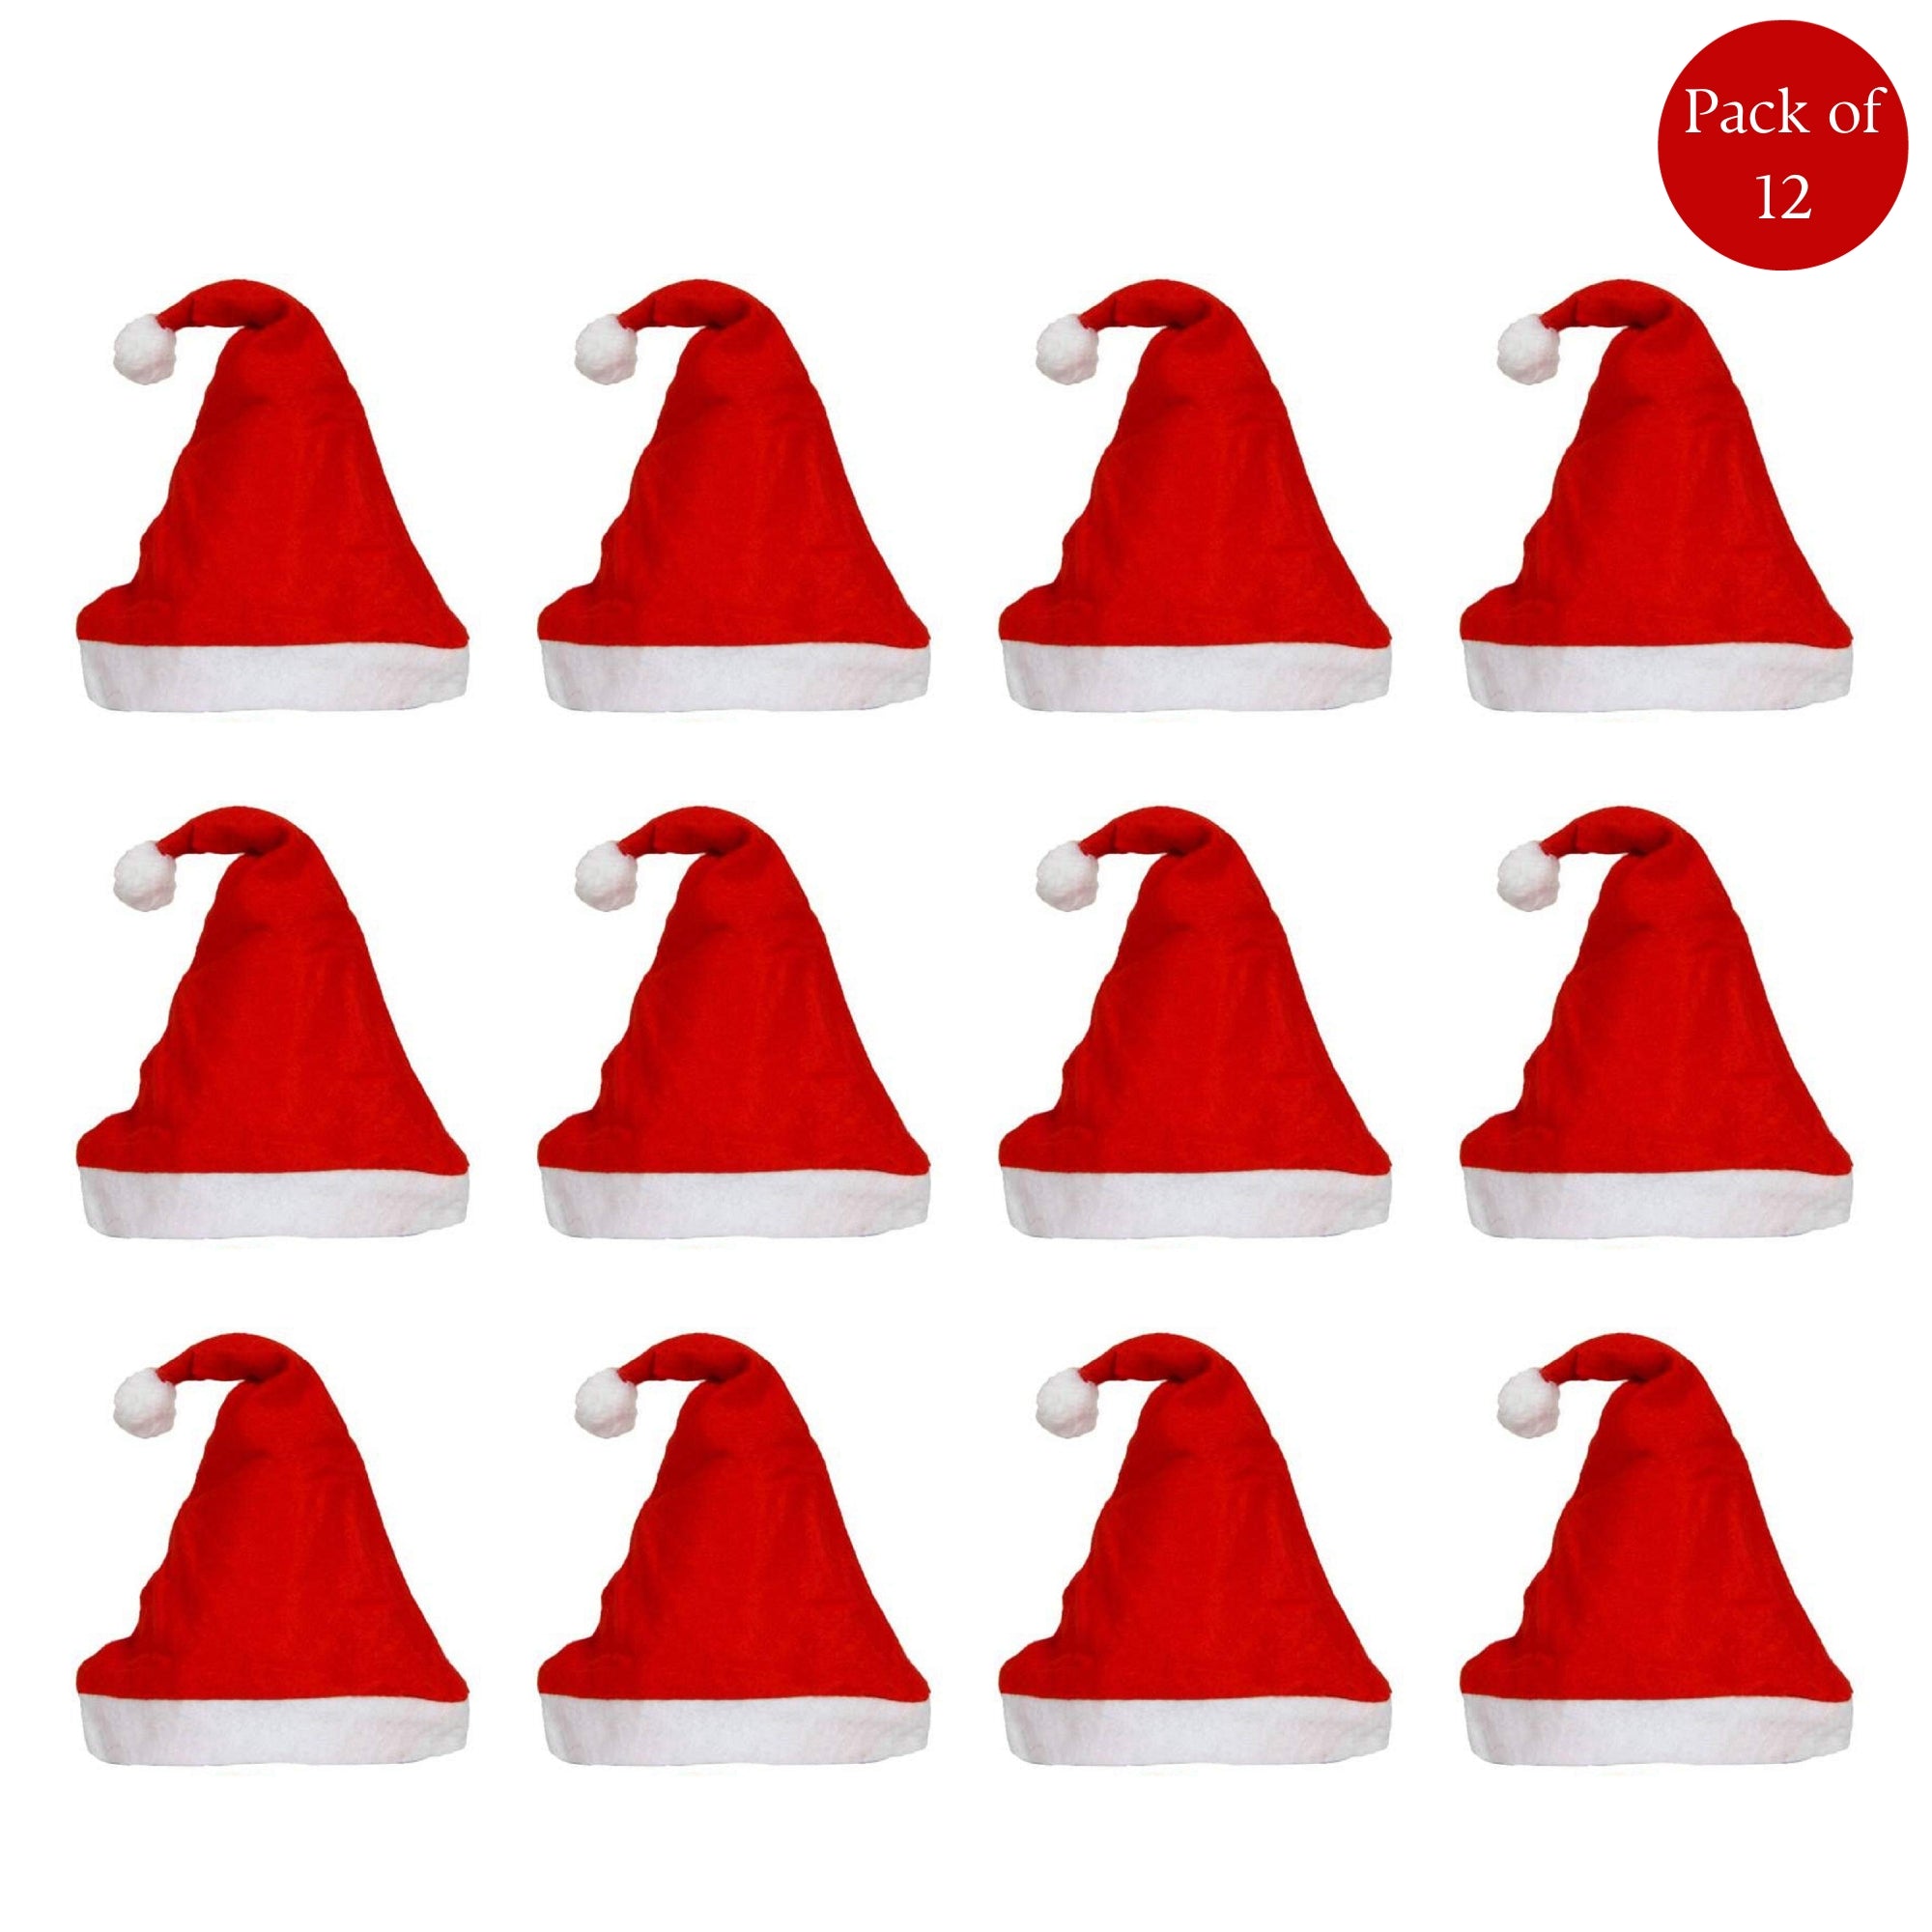 eCraftIndia Red and White Merry Christmas Hats, Santa Claus Caps for kids and Adults - Free Size XMAS Caps, Santa Claus Hats for Christmas, New Year, Festive Holiday Party (Set of 12) 1